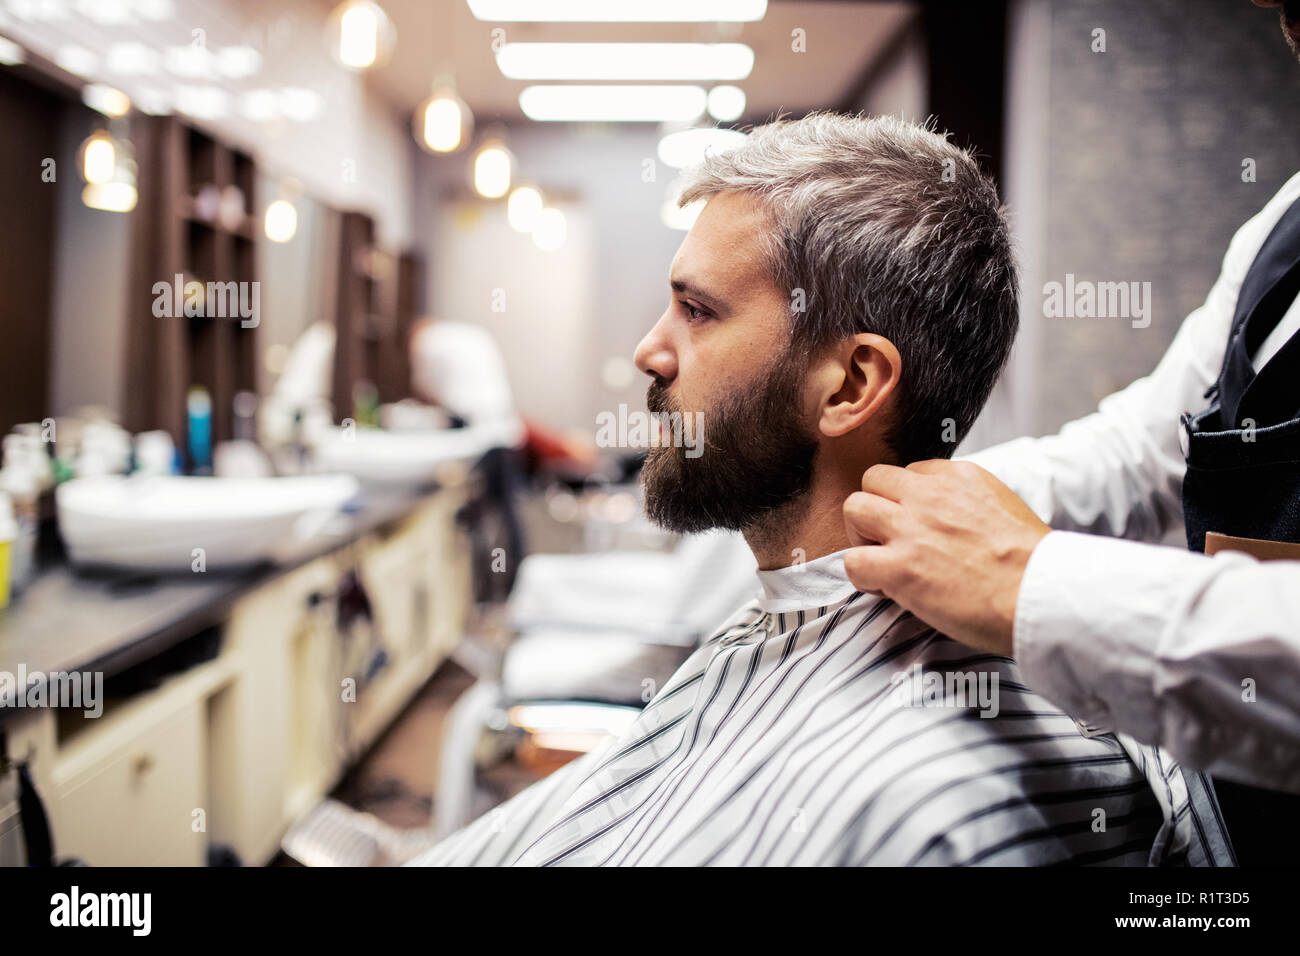 Hipster man client visiting haidresser and hairstylist in barber shop. Stock Photo